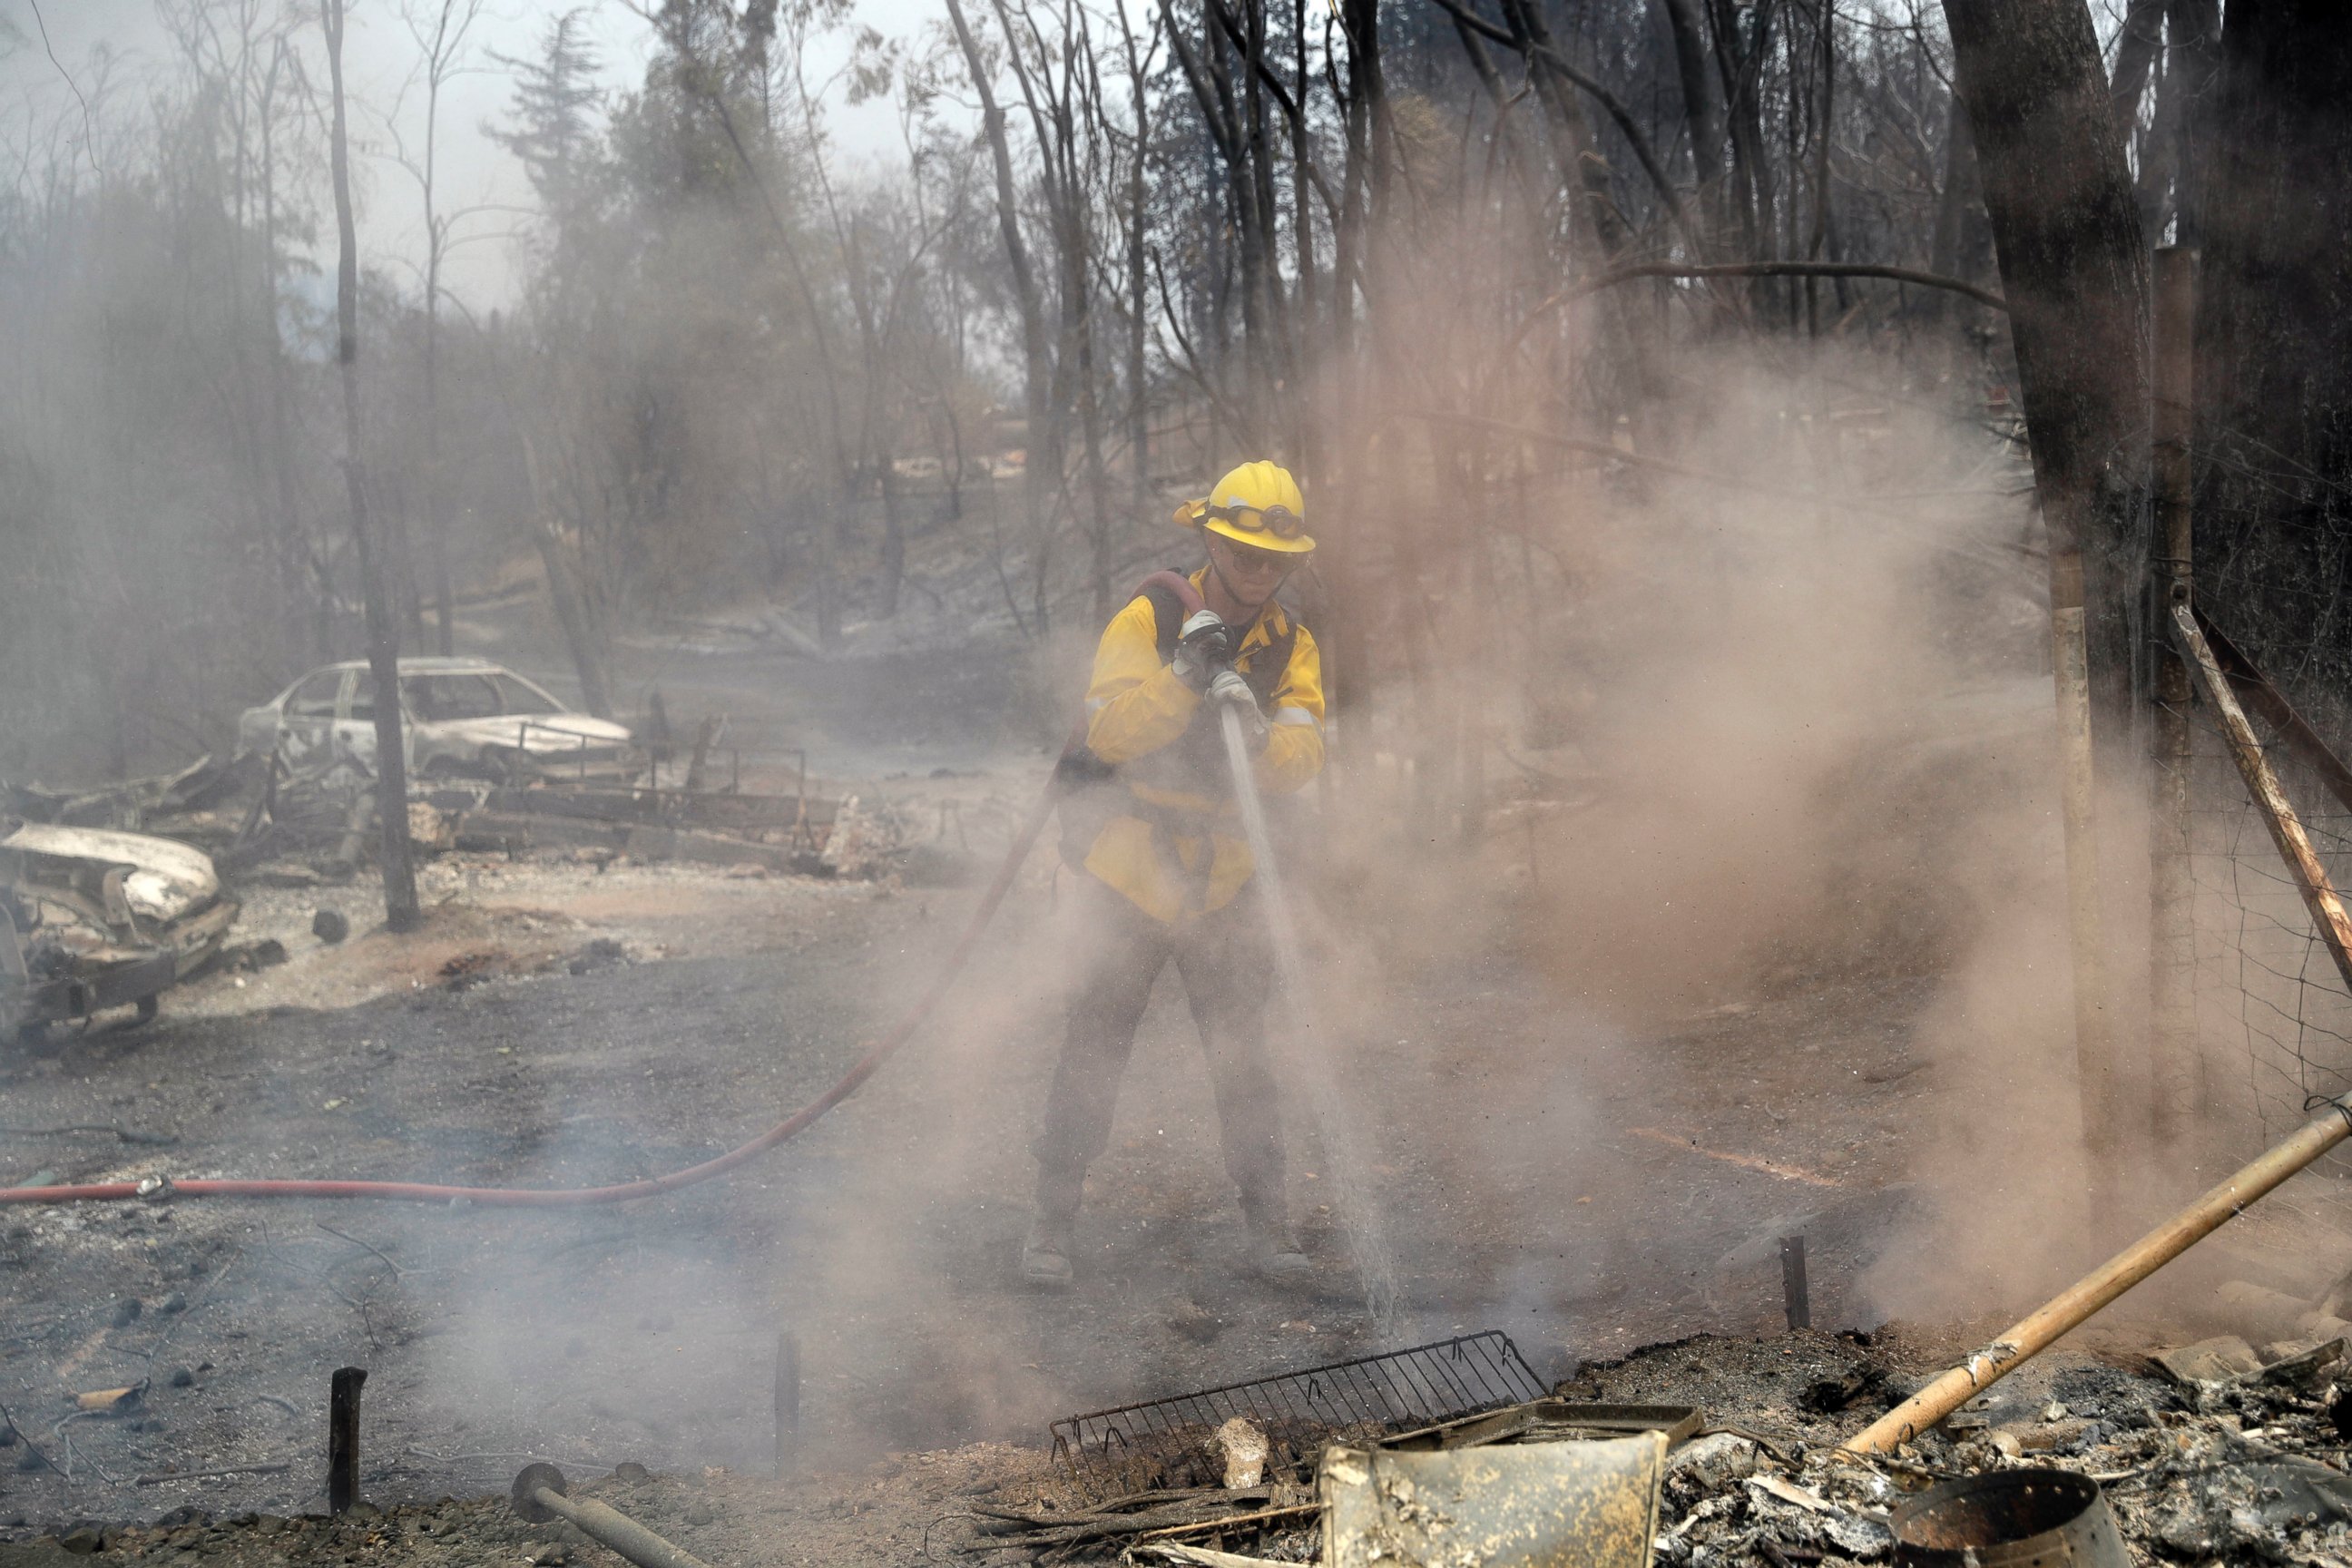 San Bernardino County Fire Department firefighter James Lippen hoses down hot spots left behind by a wildfire, Sunday, July 29, 2018, in Keswick, Calif.